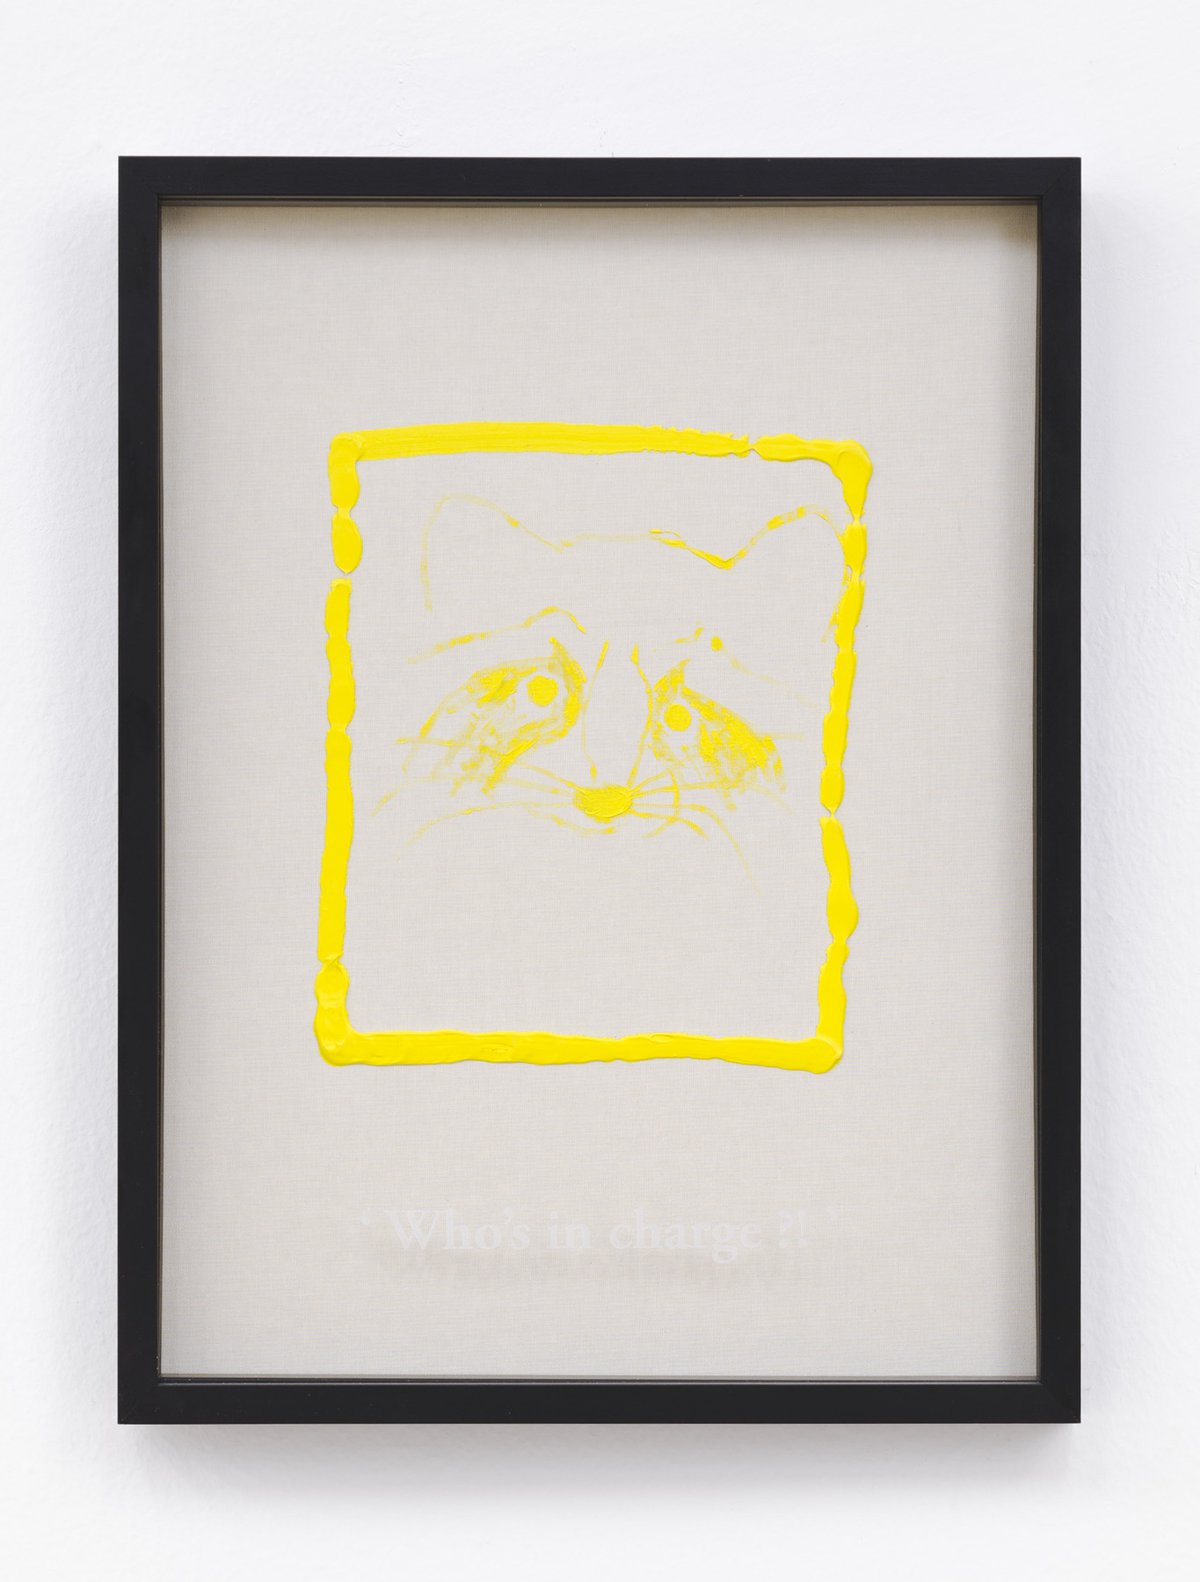 Philipp Timischl&quot;Who&#x27;s in charge?!&quot; (Beige/Cadmium Yellow Lemon), 2017Acrylic on linen and glass-engraved object frame40.1 x 32.1 cm